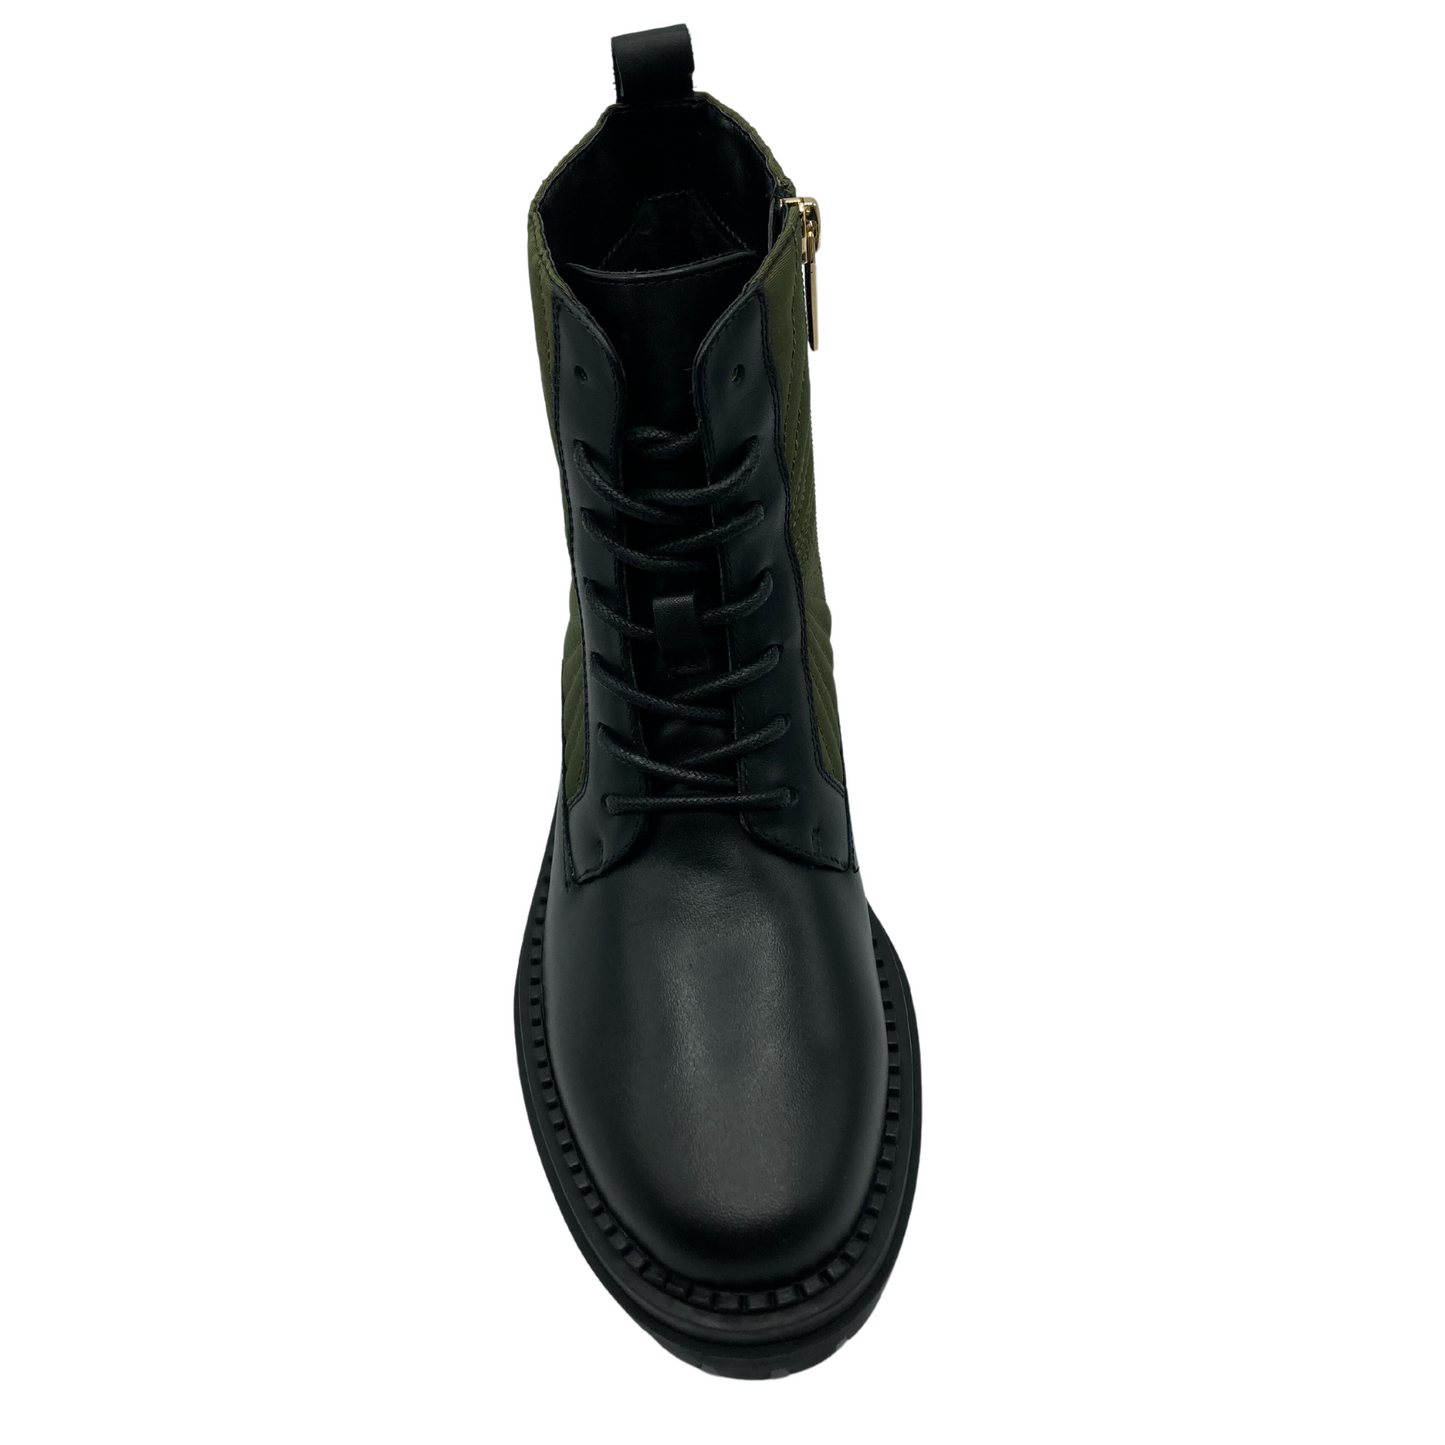 Top view of black leather short boot with side zipper closure and rubber outsole